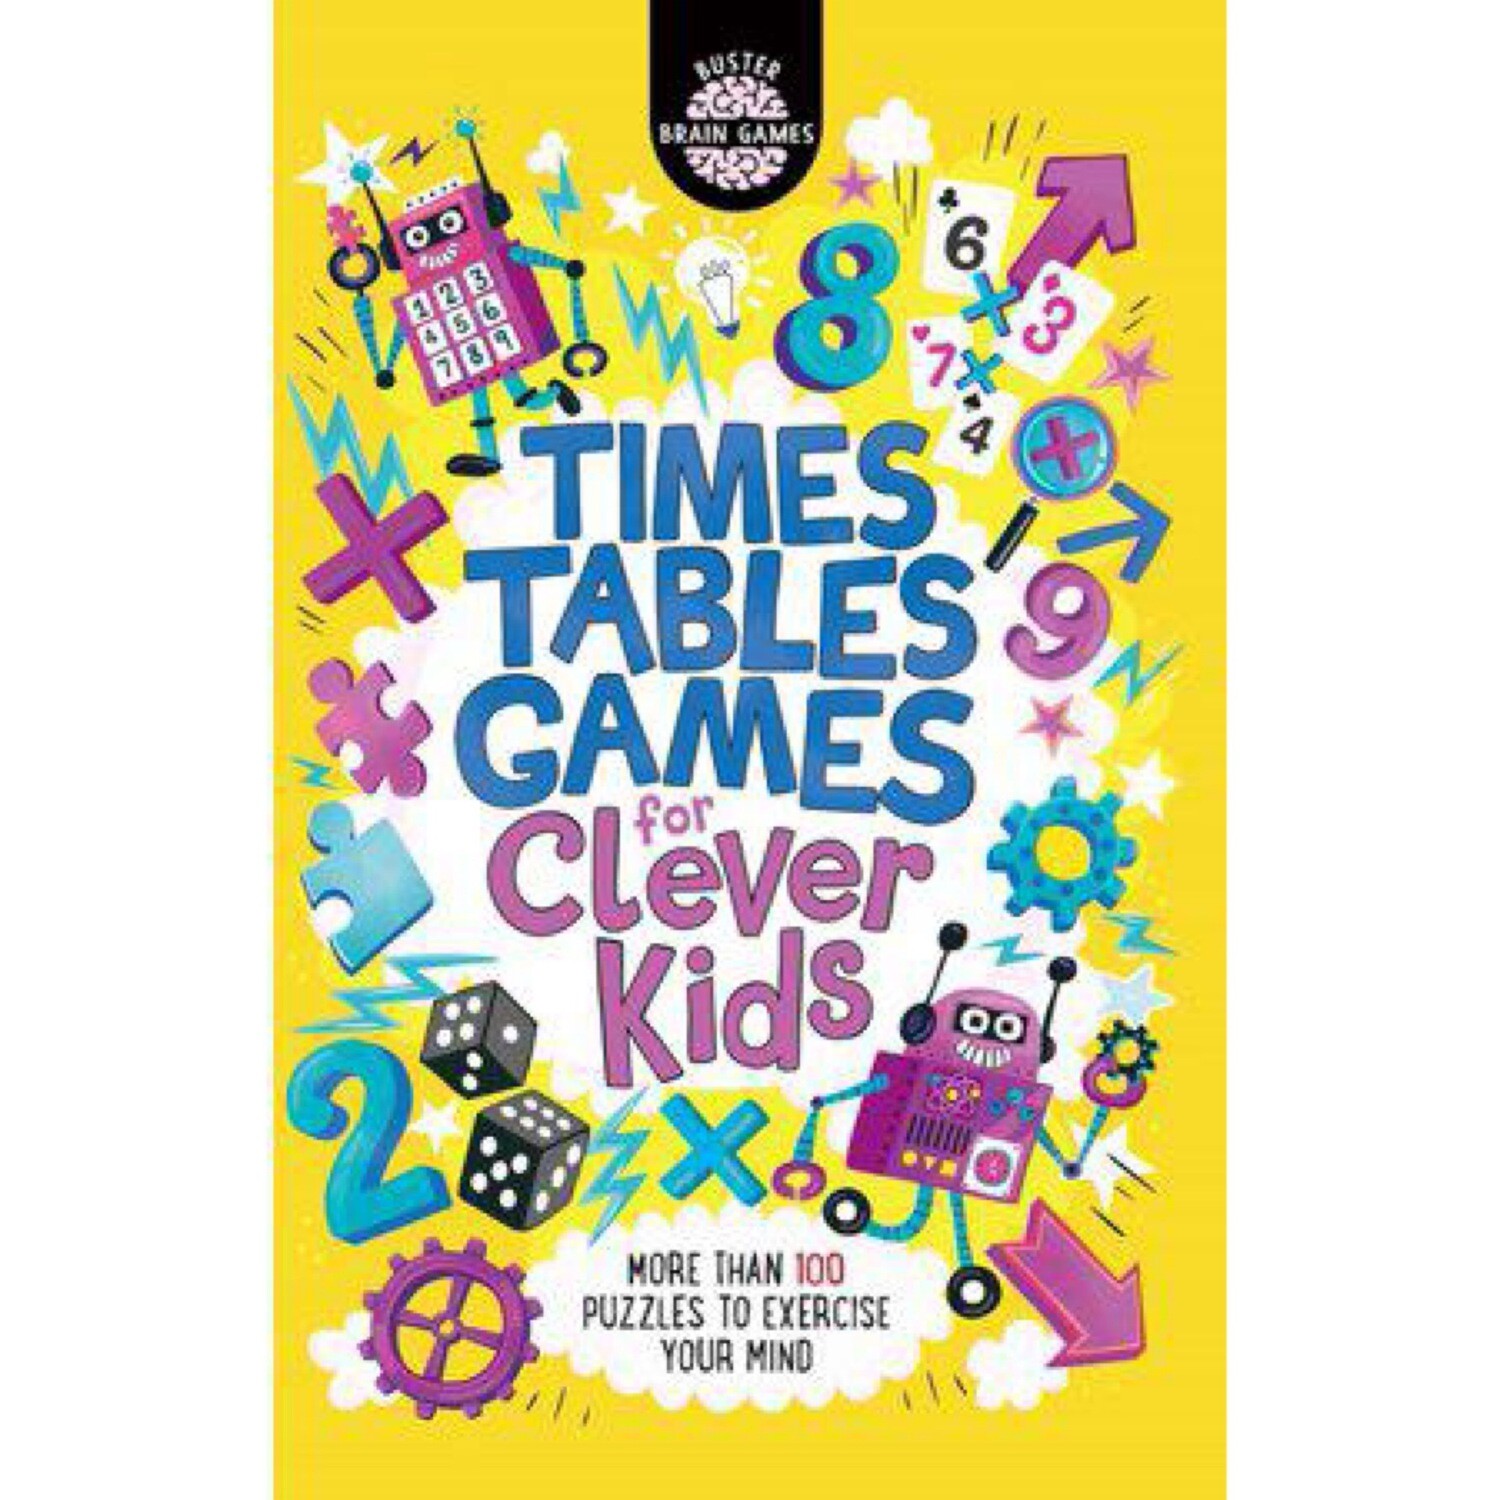 Times Tables Games for Clever Kids - (Buster Brain Games) by Gareth Moore (Paperback)